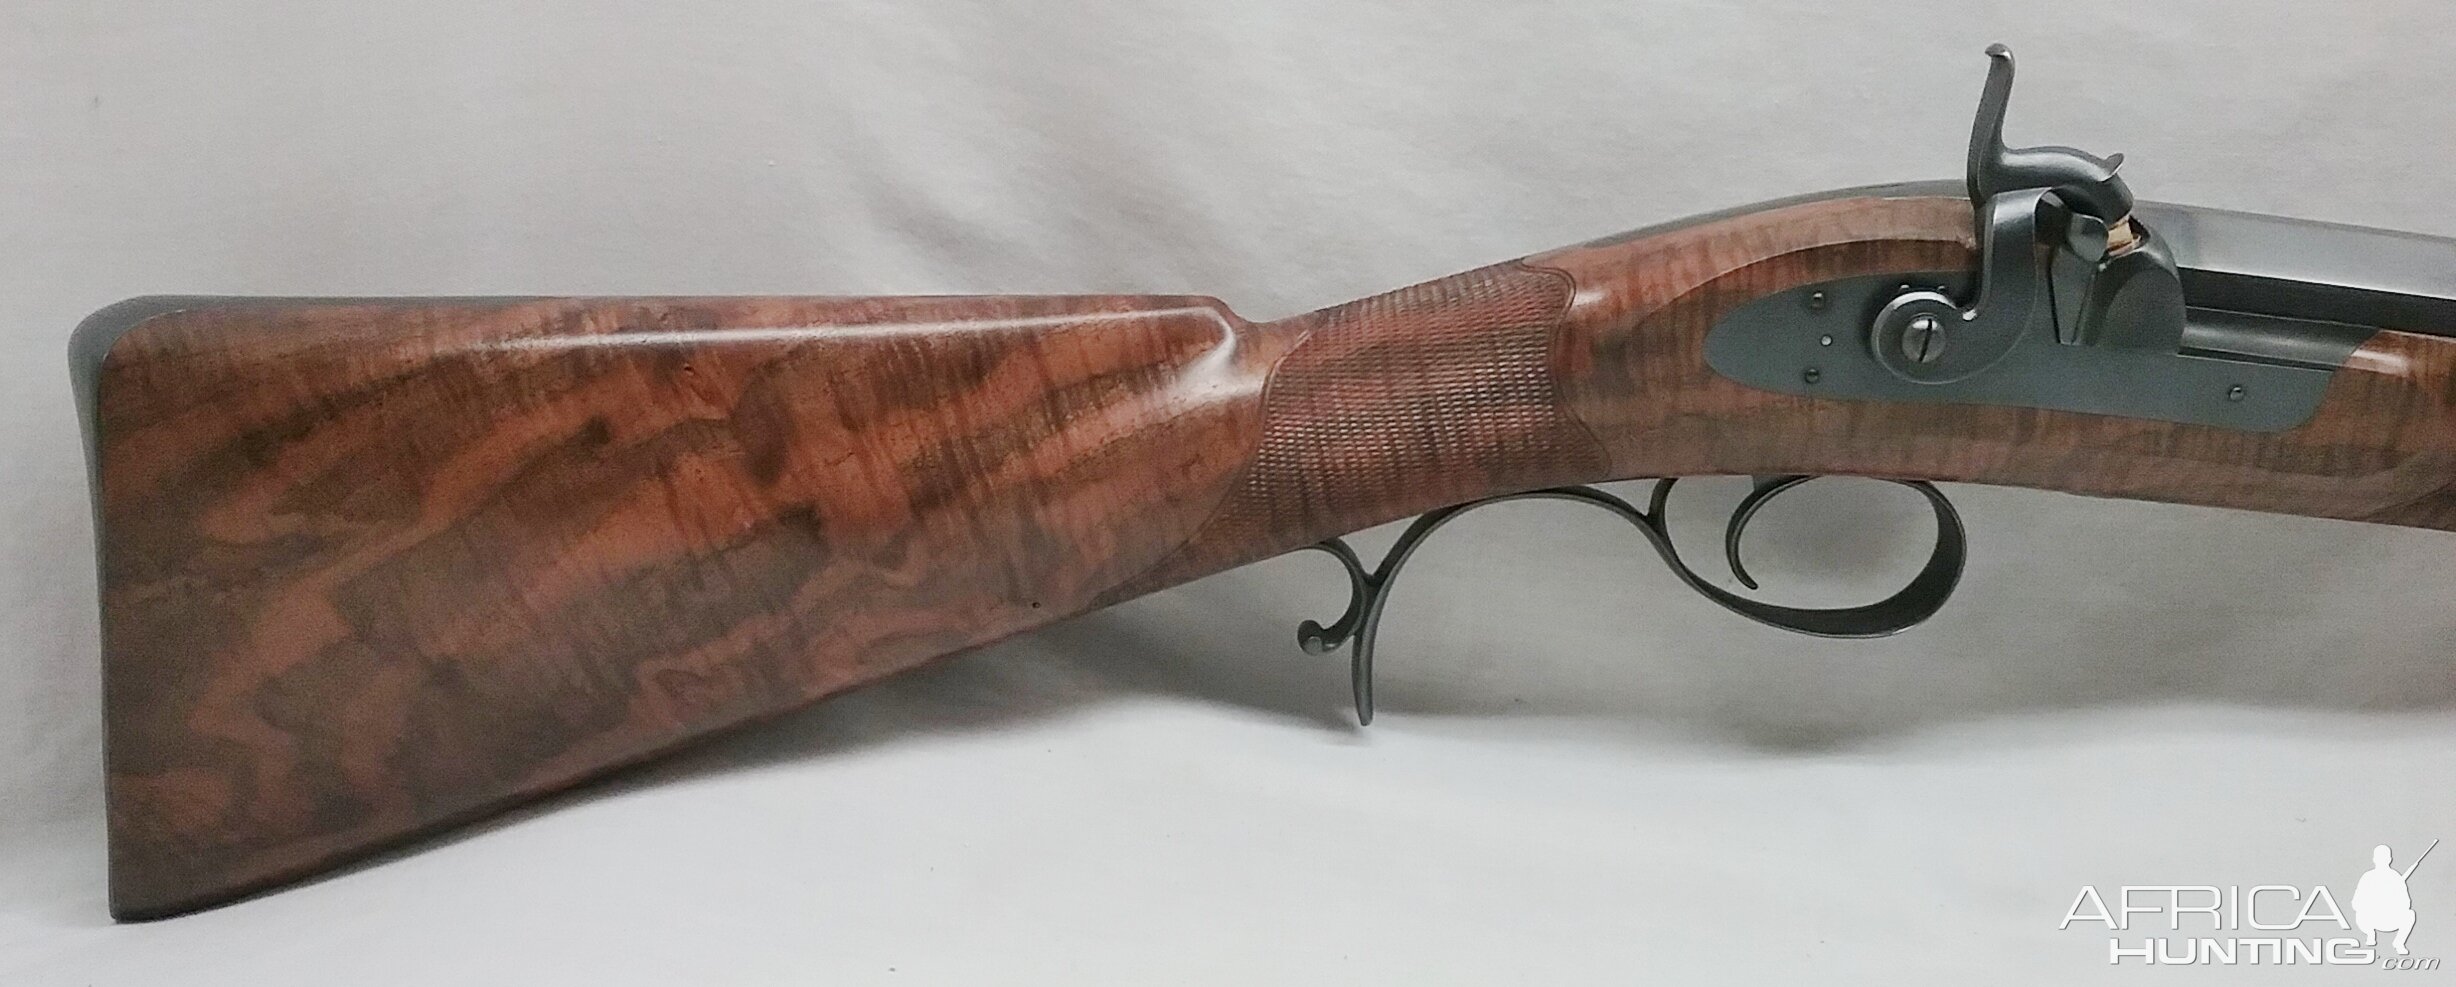 8 Bore Rifle by Hollie Wessel